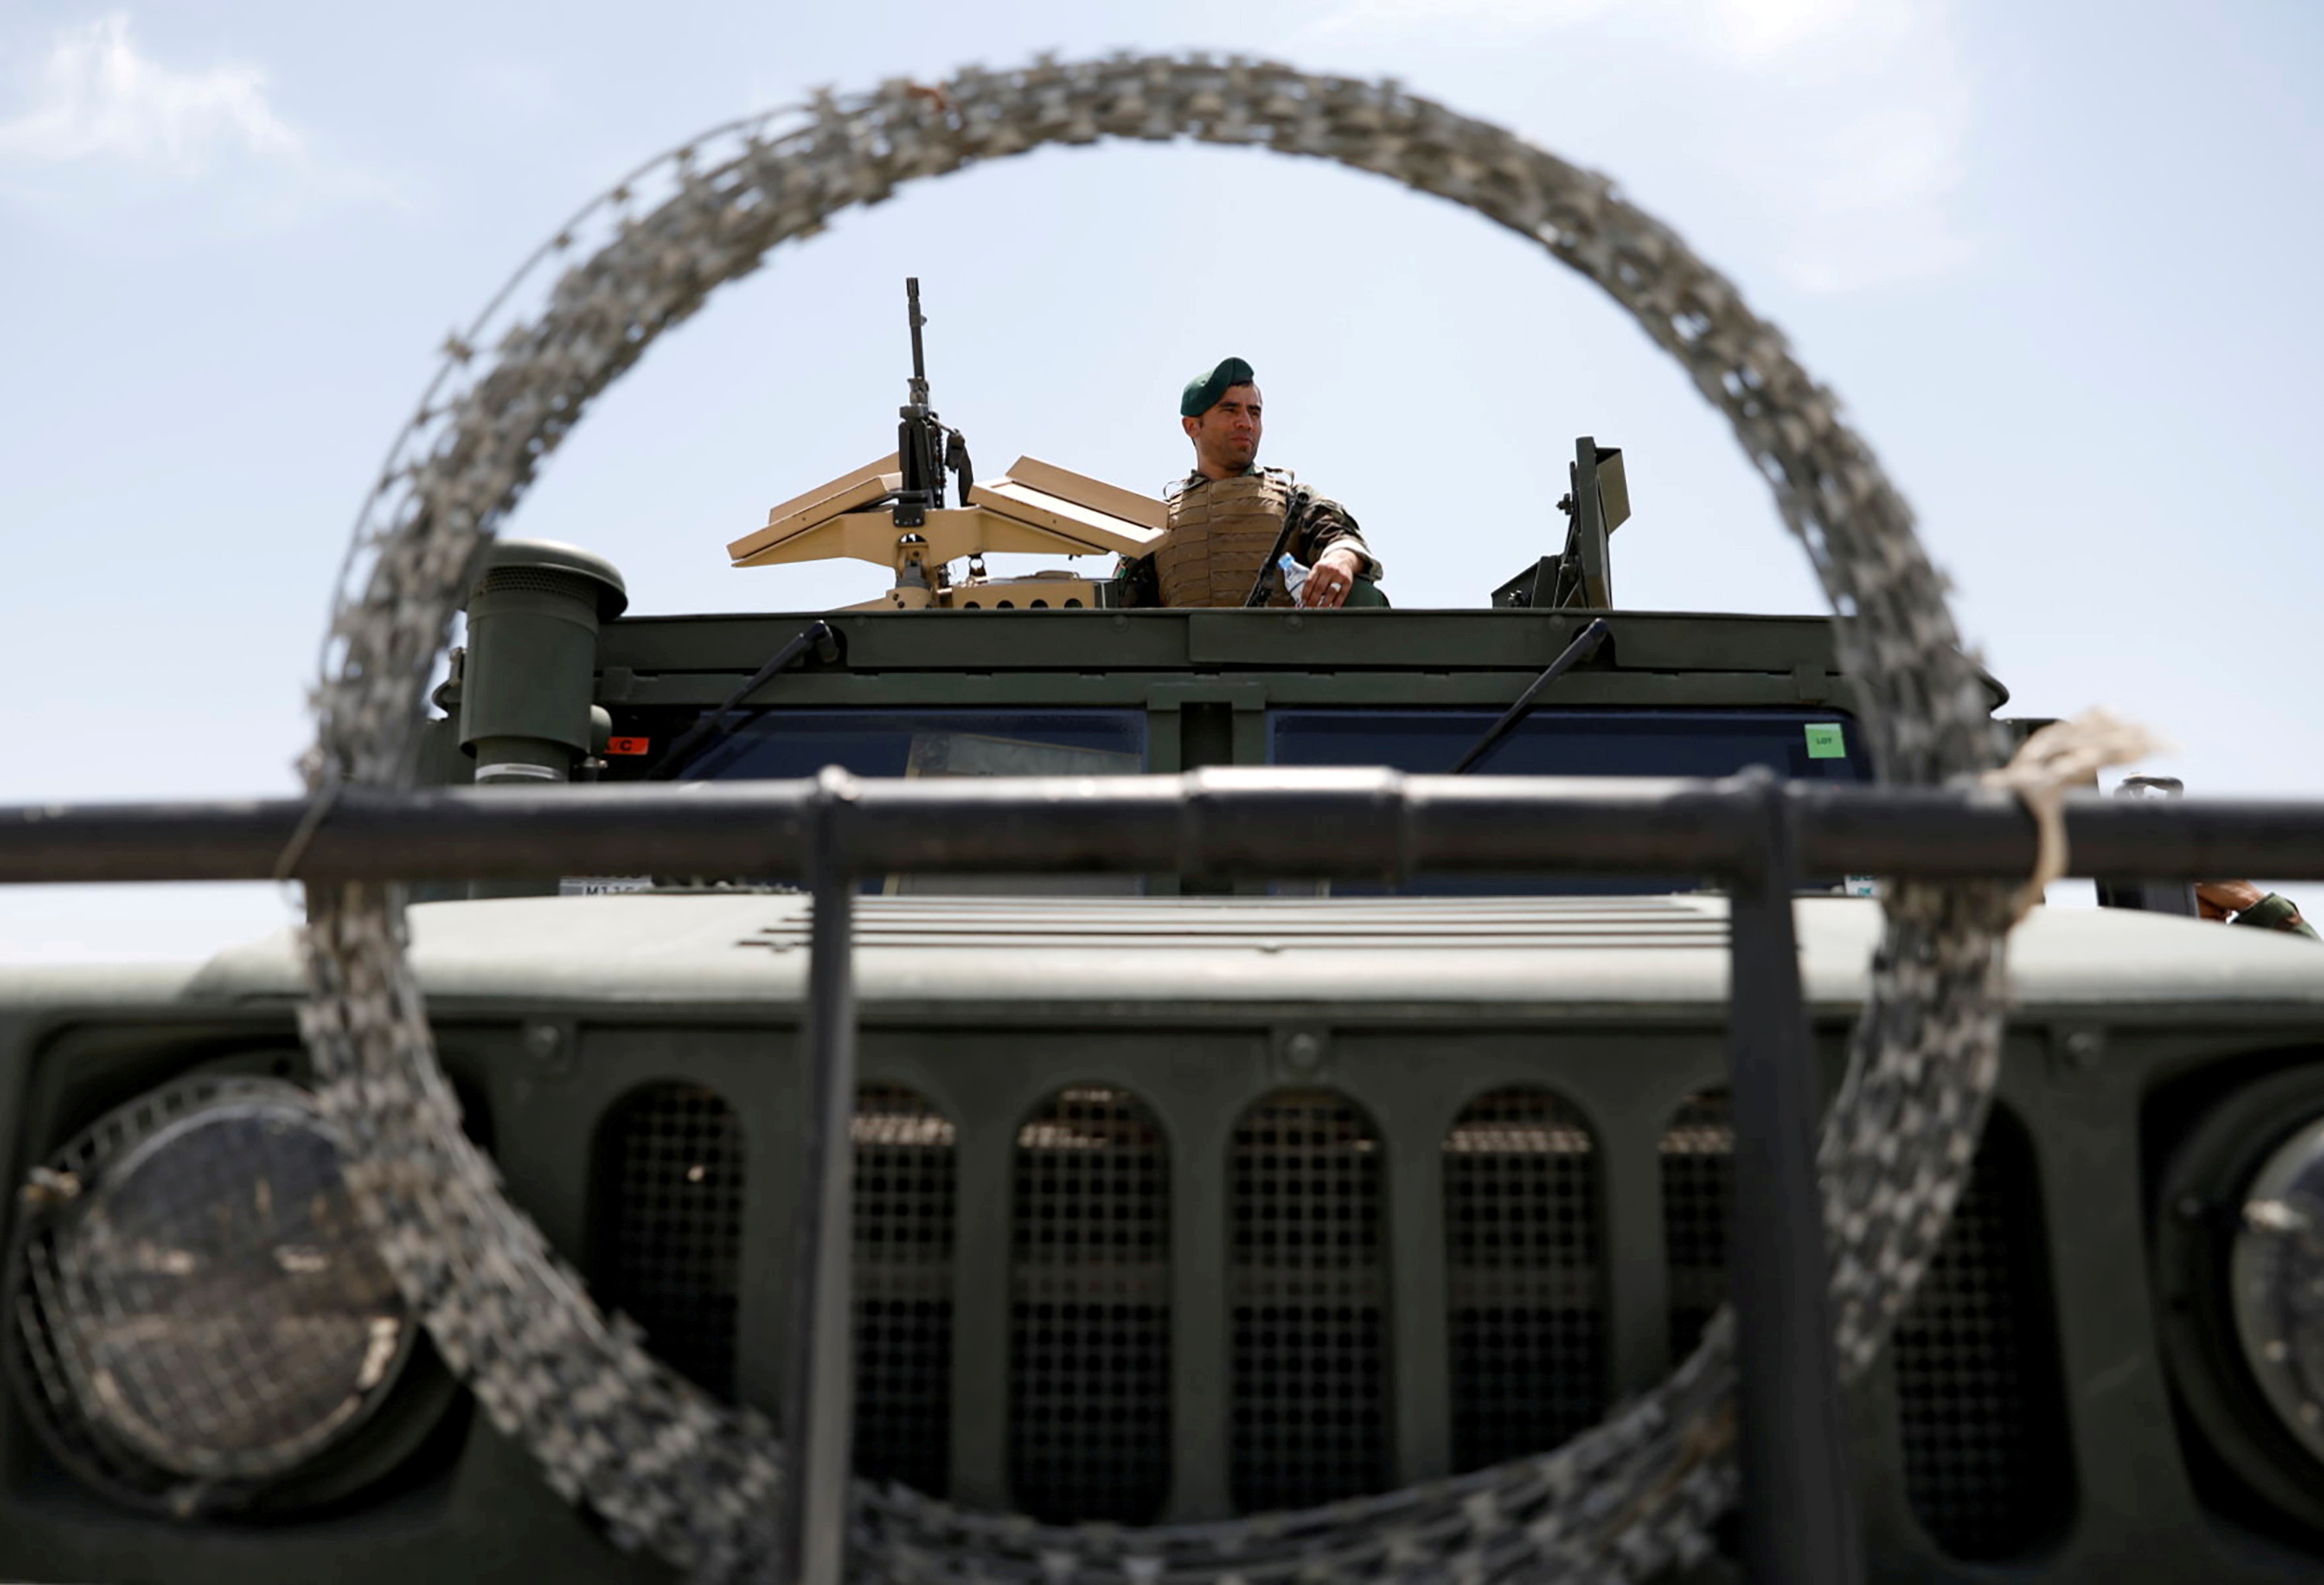 An Afghan security forces member keeps watch as he sits in an army vehicle in Bagram U.S. air base, after American troops vacated it, in Parwan province